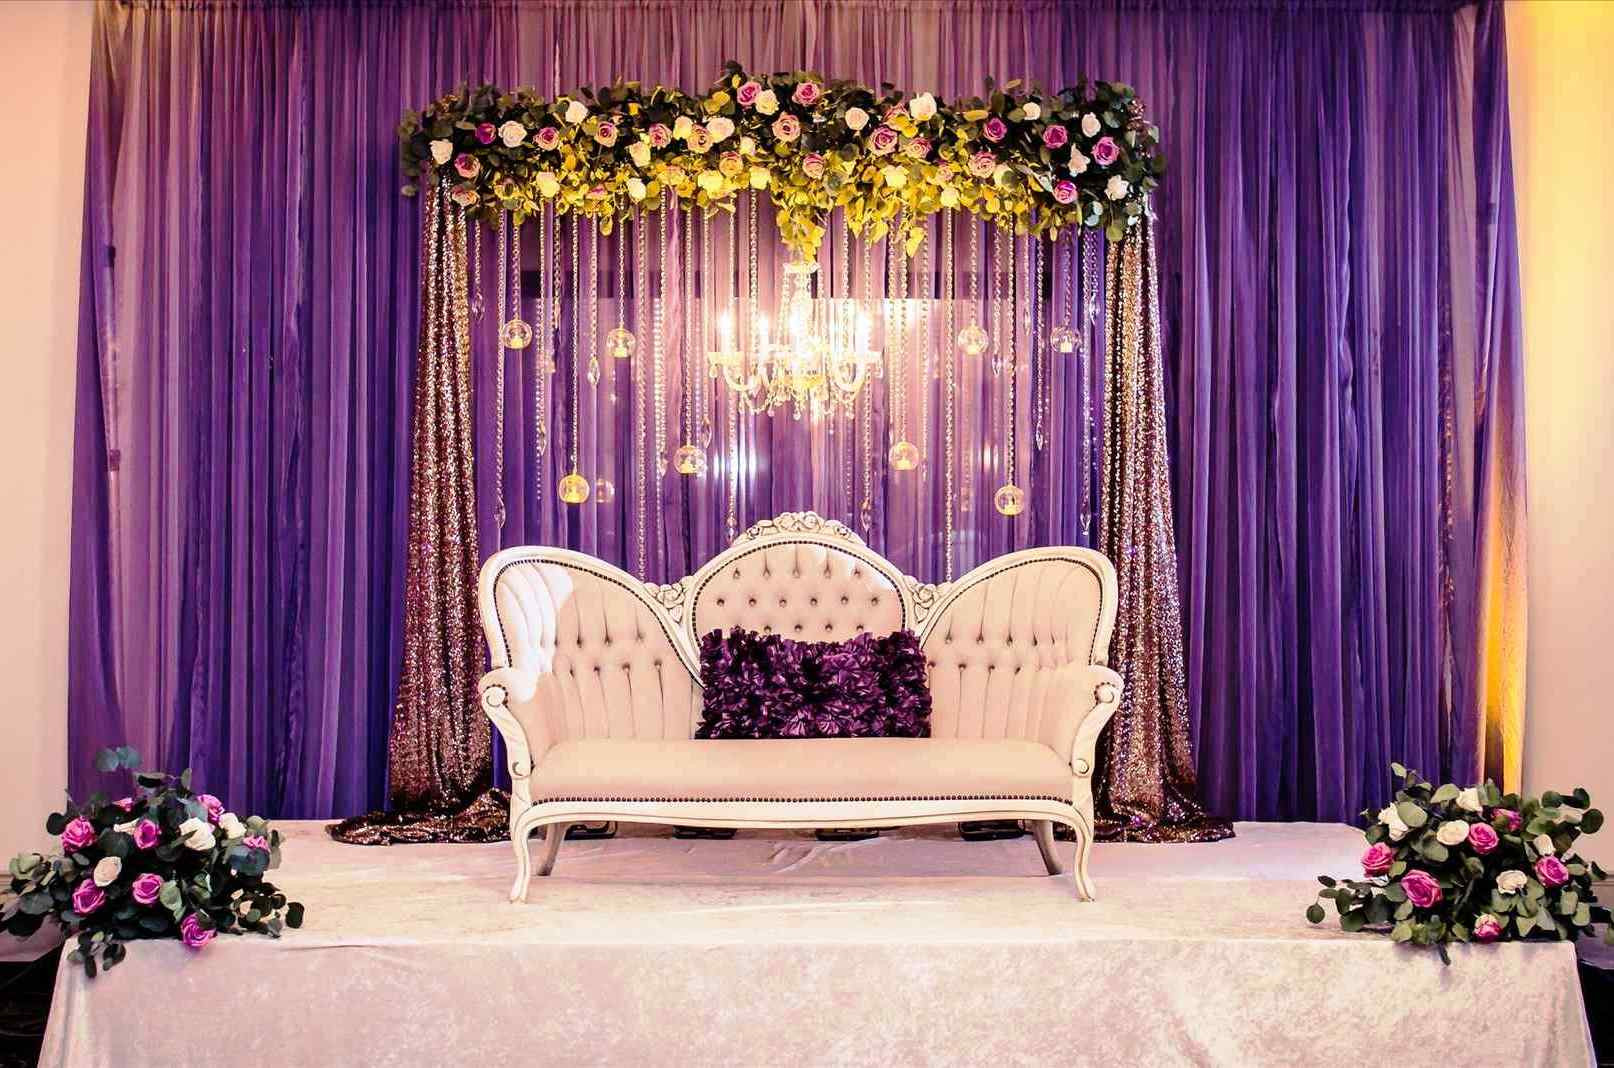 Small Engagement Party Ideas Home
 Engagement Day Indoor Celebrations Partyyar